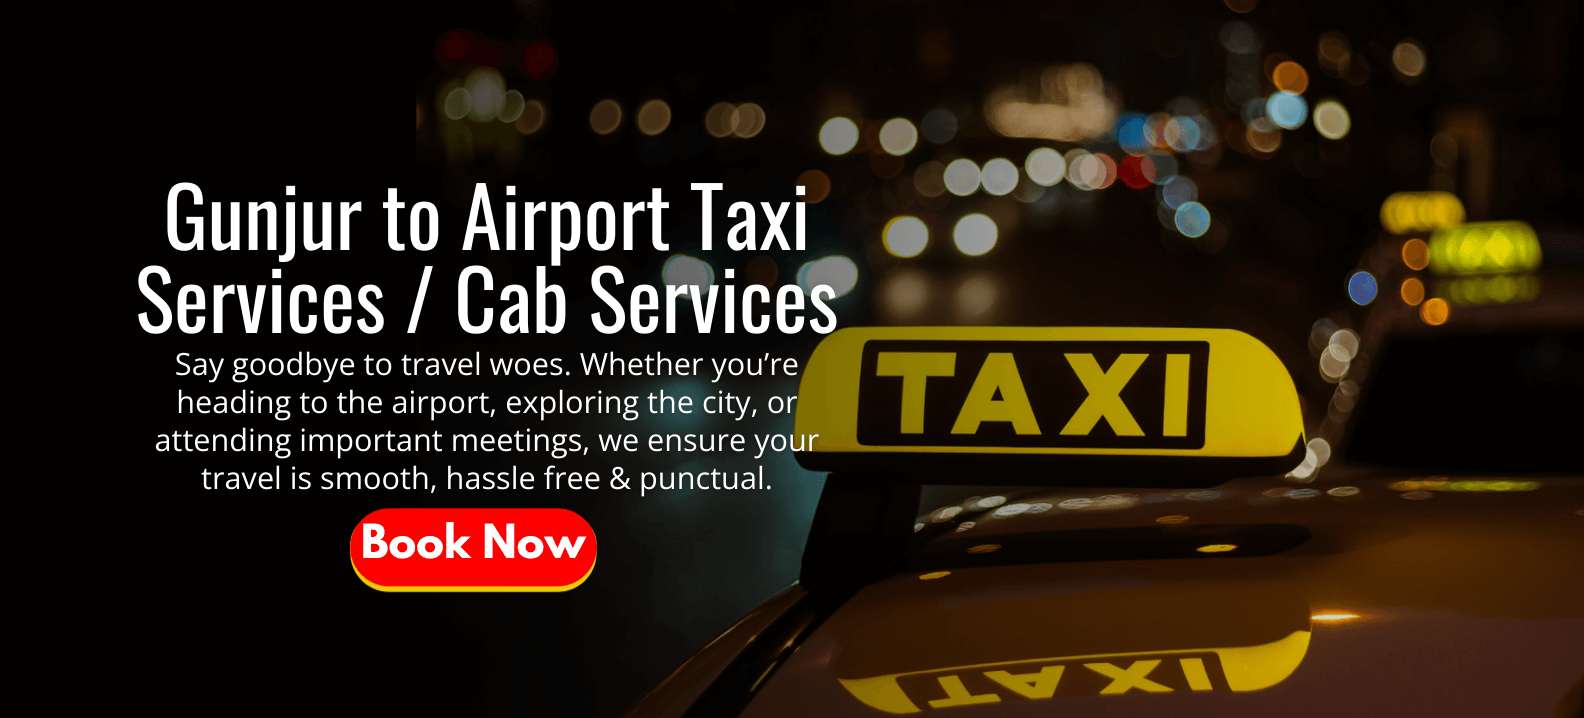 Gunjur to Airport Taxi Services _ Cab Services